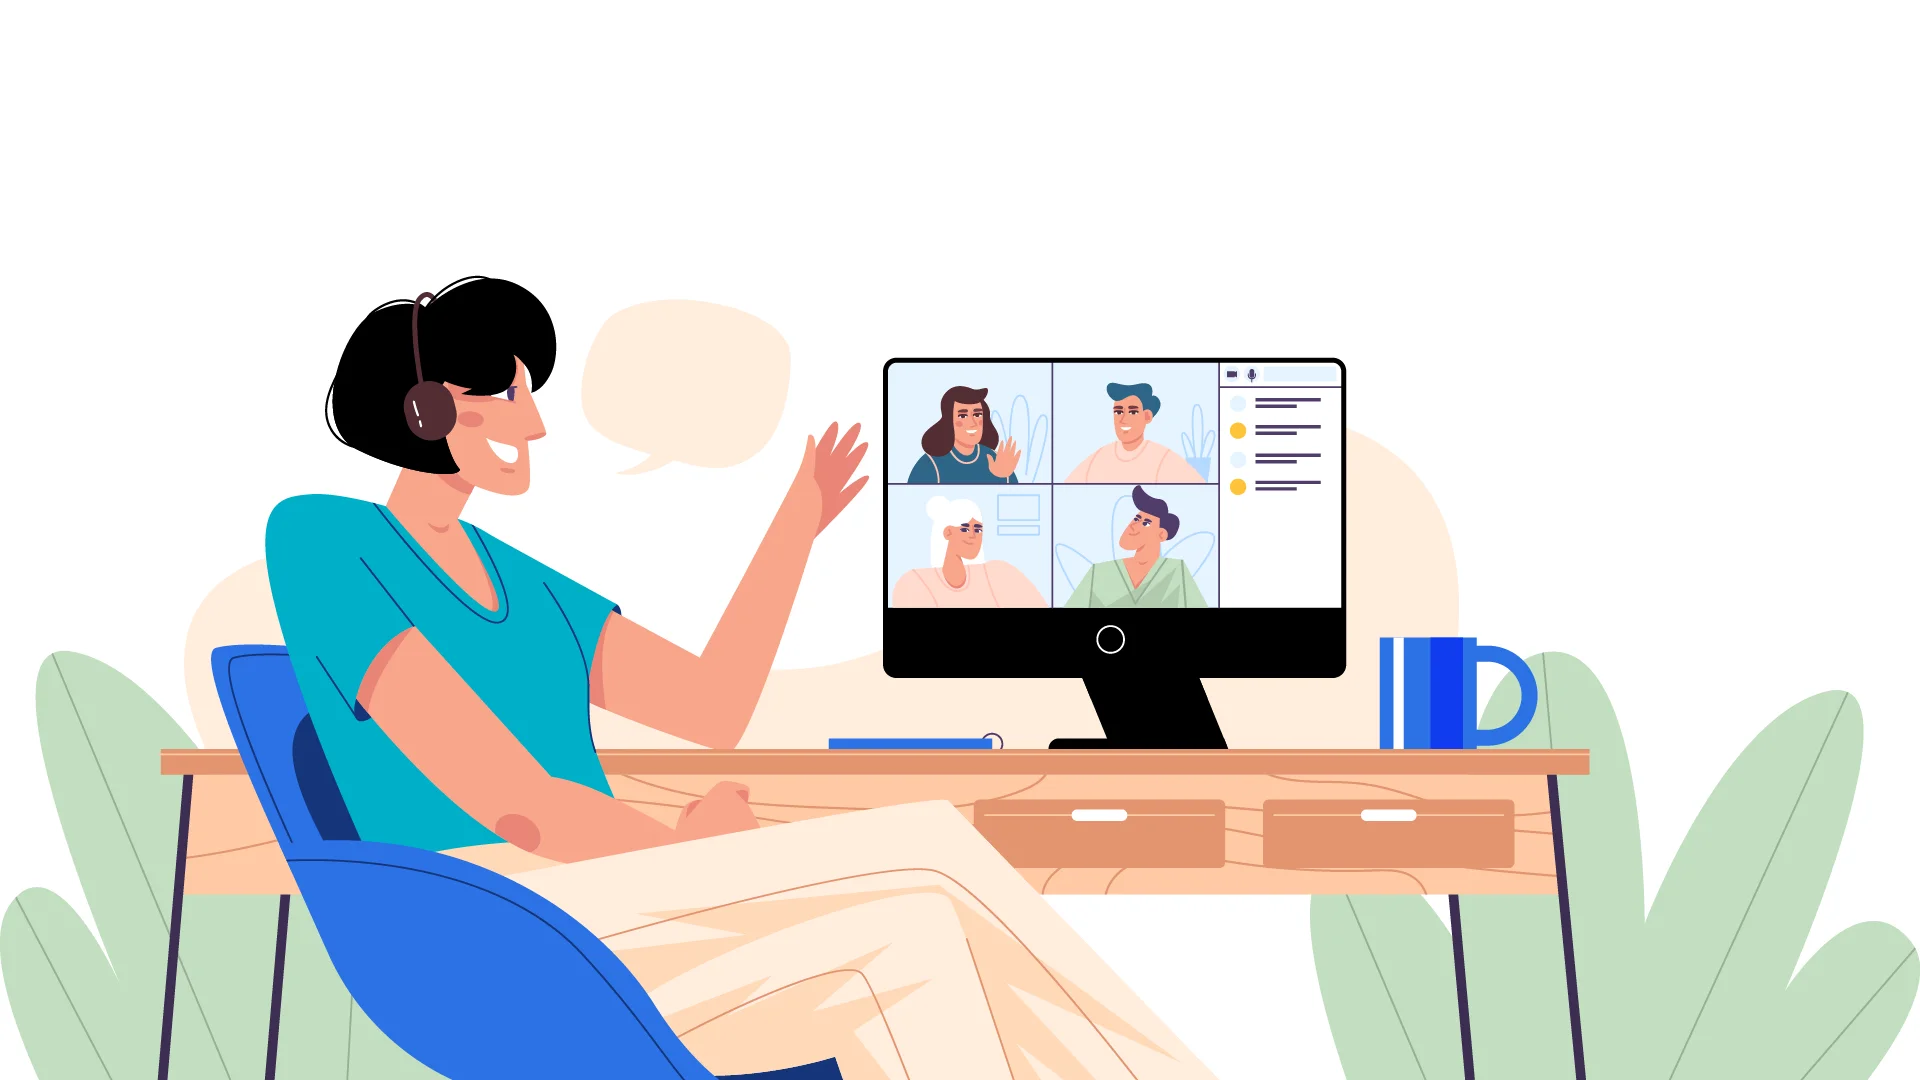 Here Are Five Tips To Help Your Remote Team Communicate Better